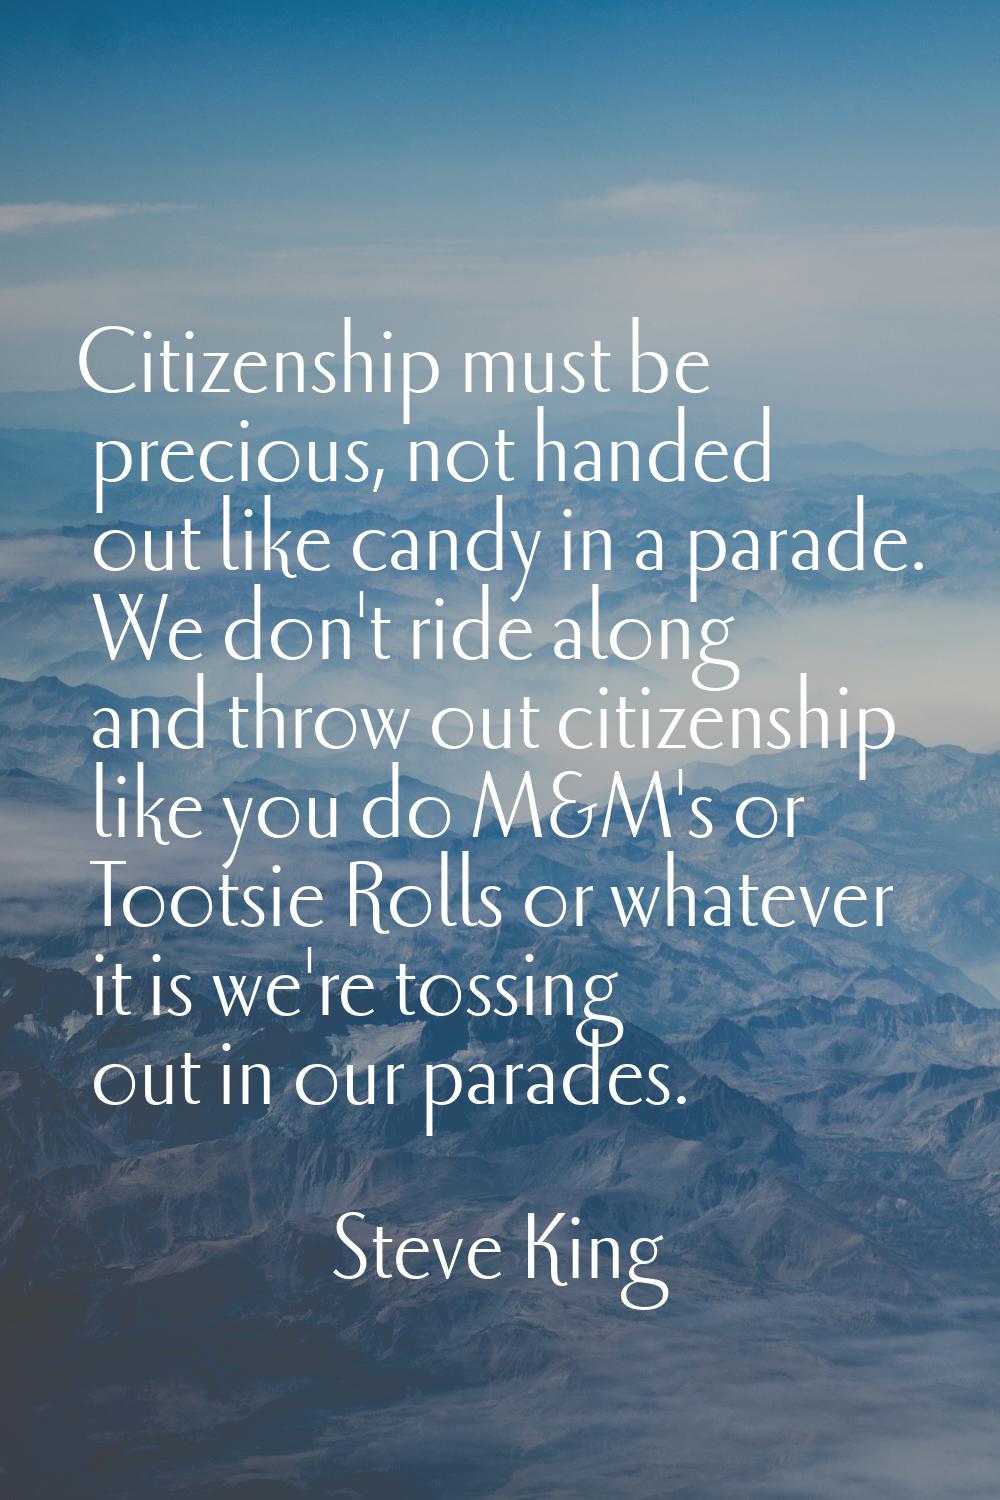 Citizenship must be precious, not handed out like candy in a parade. We don't ride along and throw 